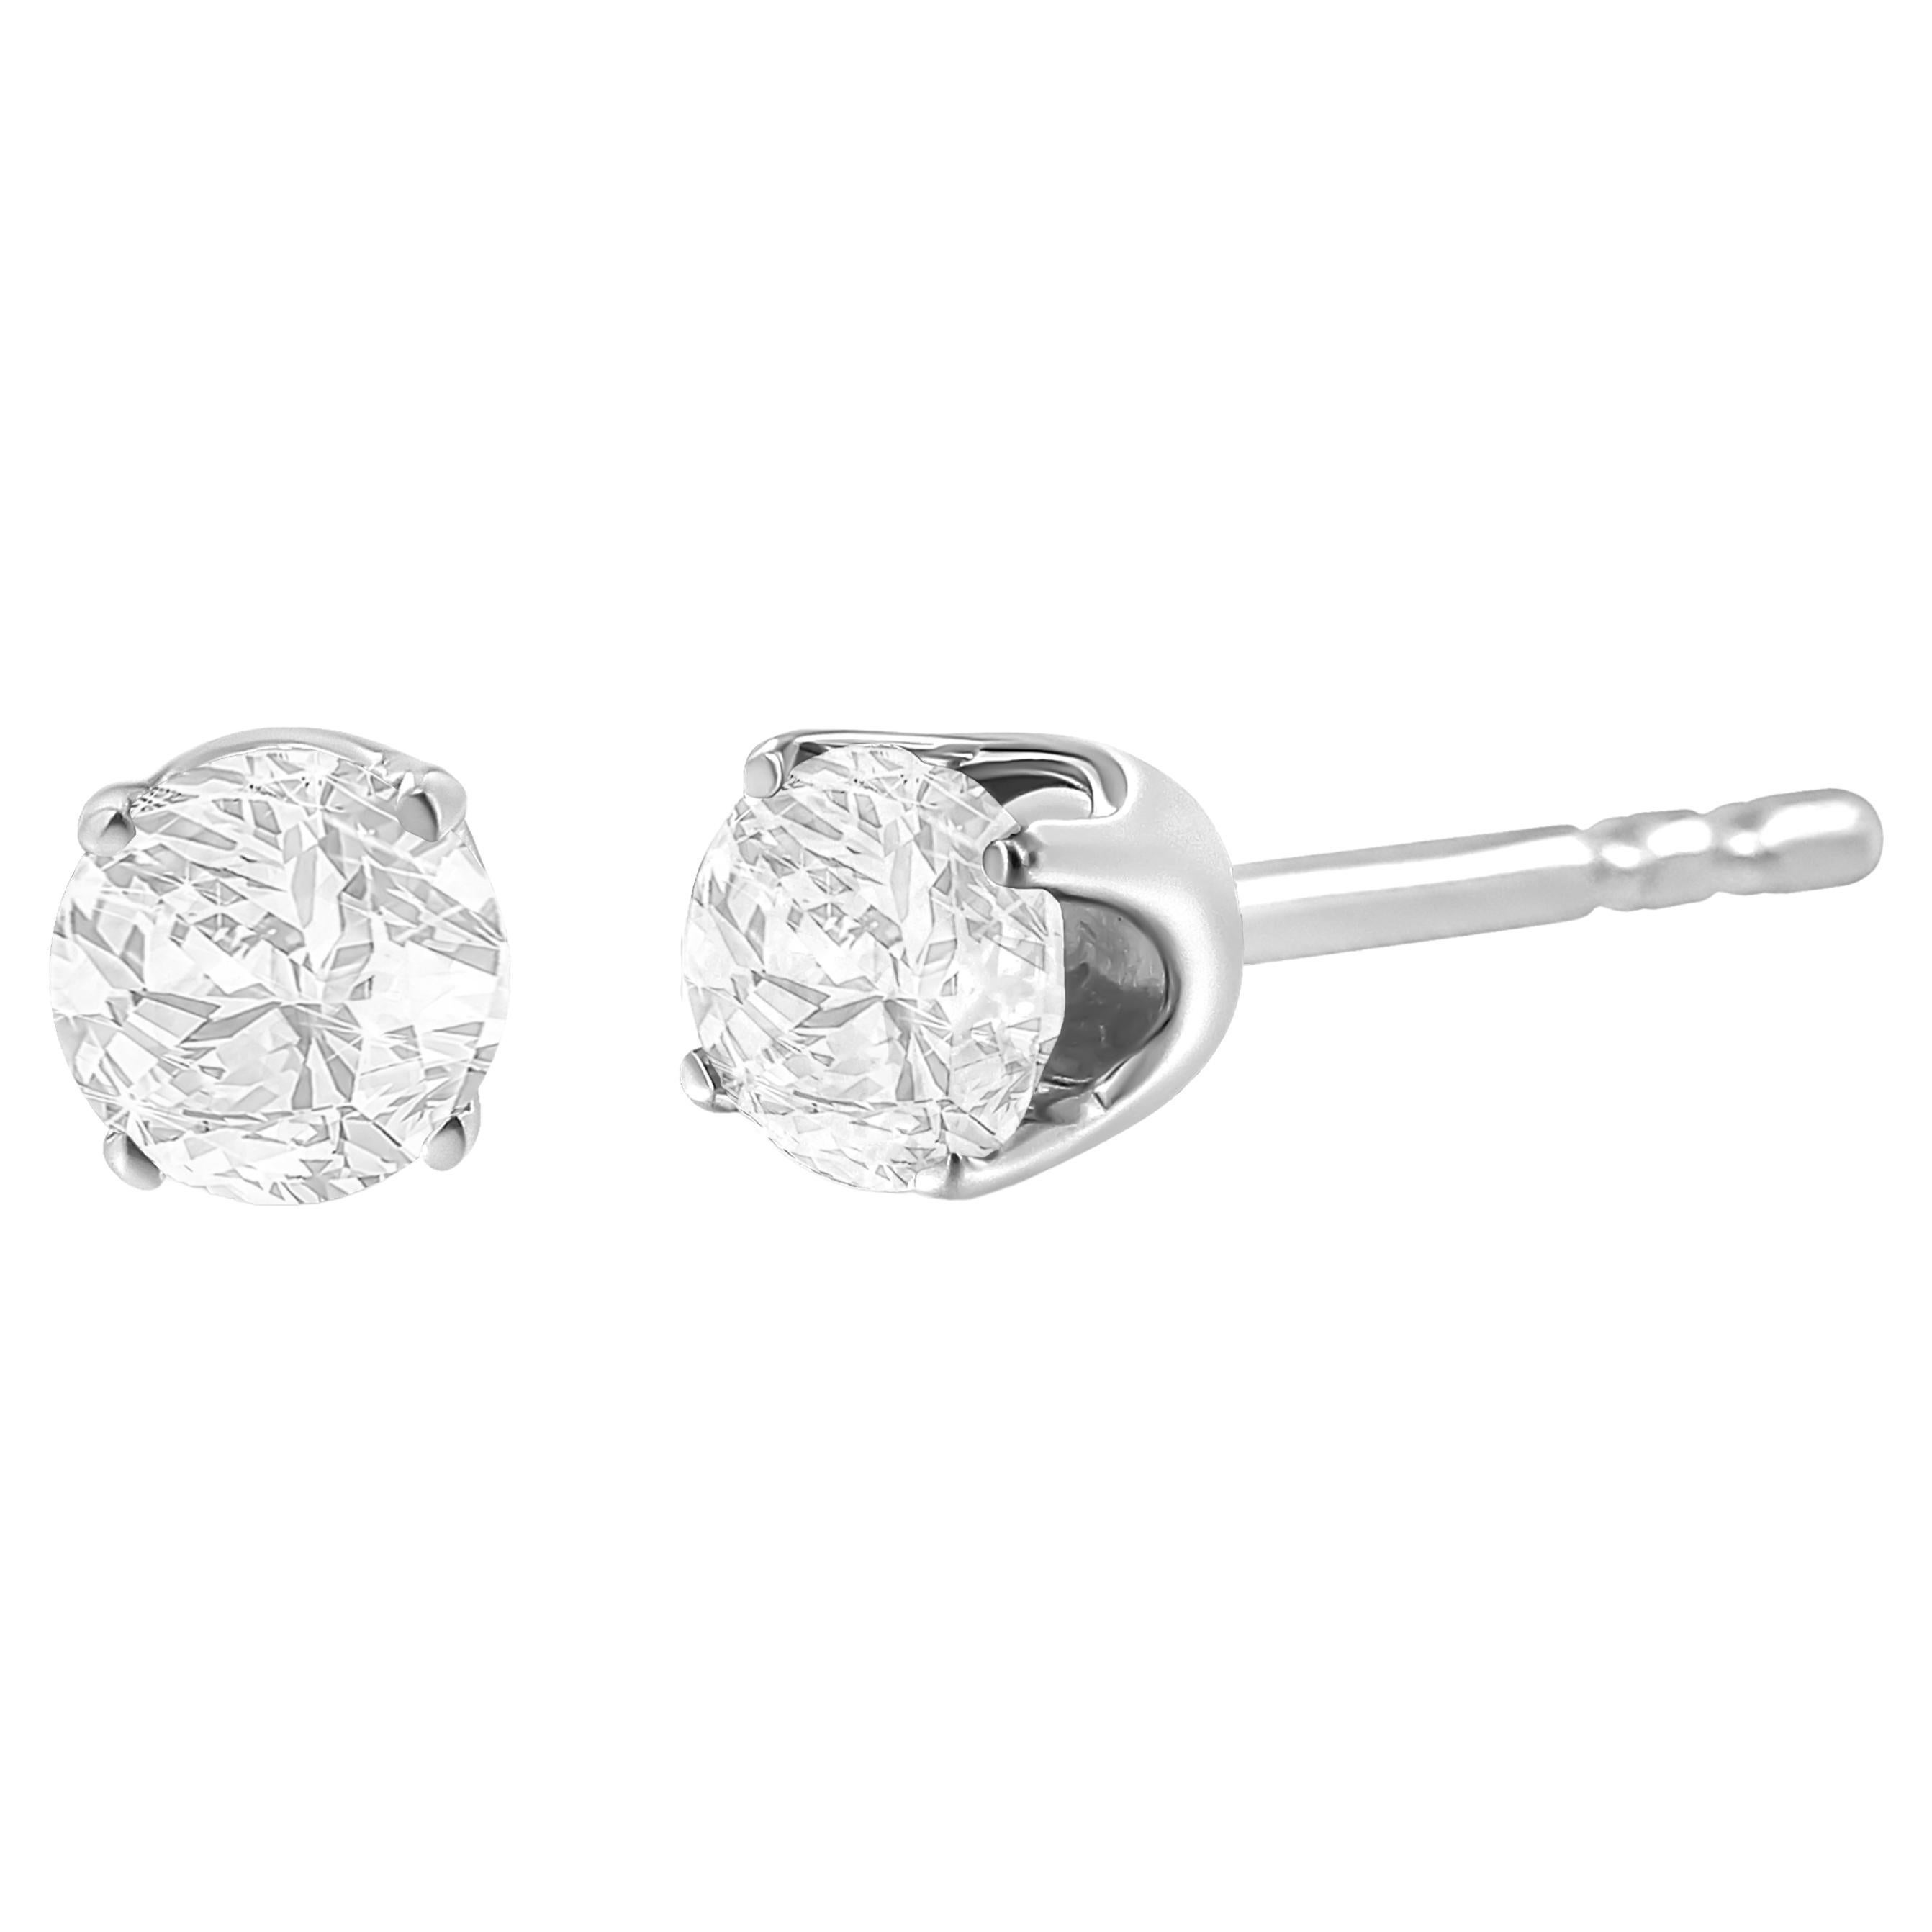 AGS Certified 14K White Gold 1.00 Carat Solitaire Diamond Stud Earrings For Sale